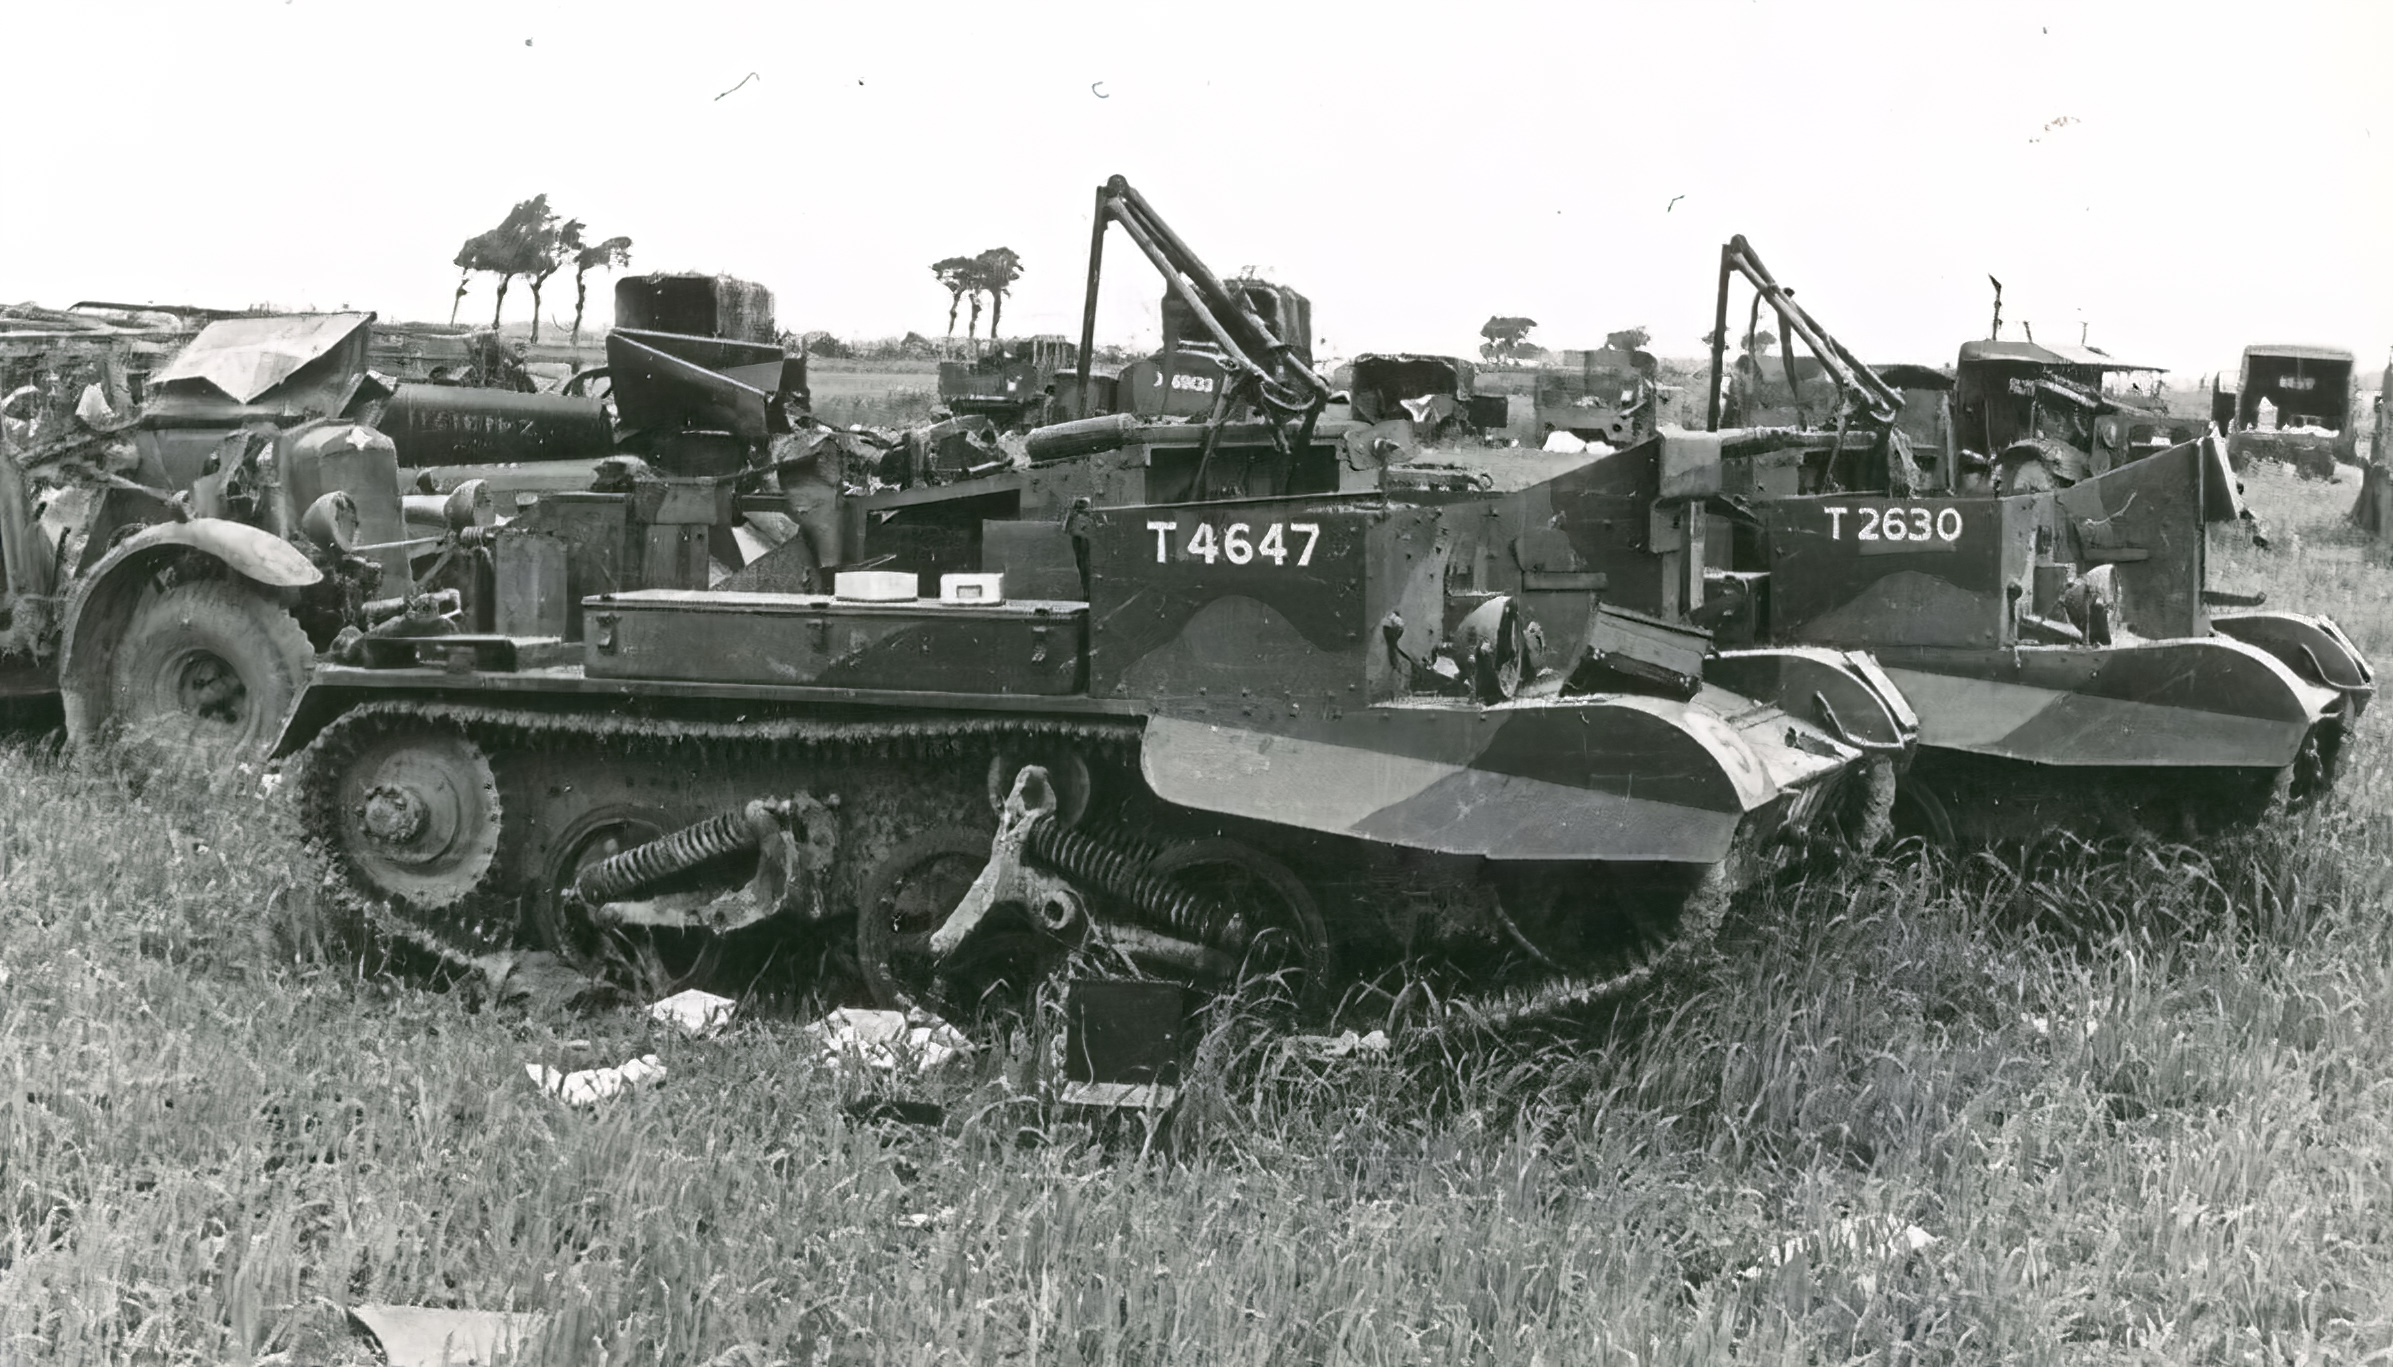 Vickers Armstrongs Universal Carrier or the Bren Carrier sn T4647 and T2630 abandoned BOF Jun 1940 ebay 01